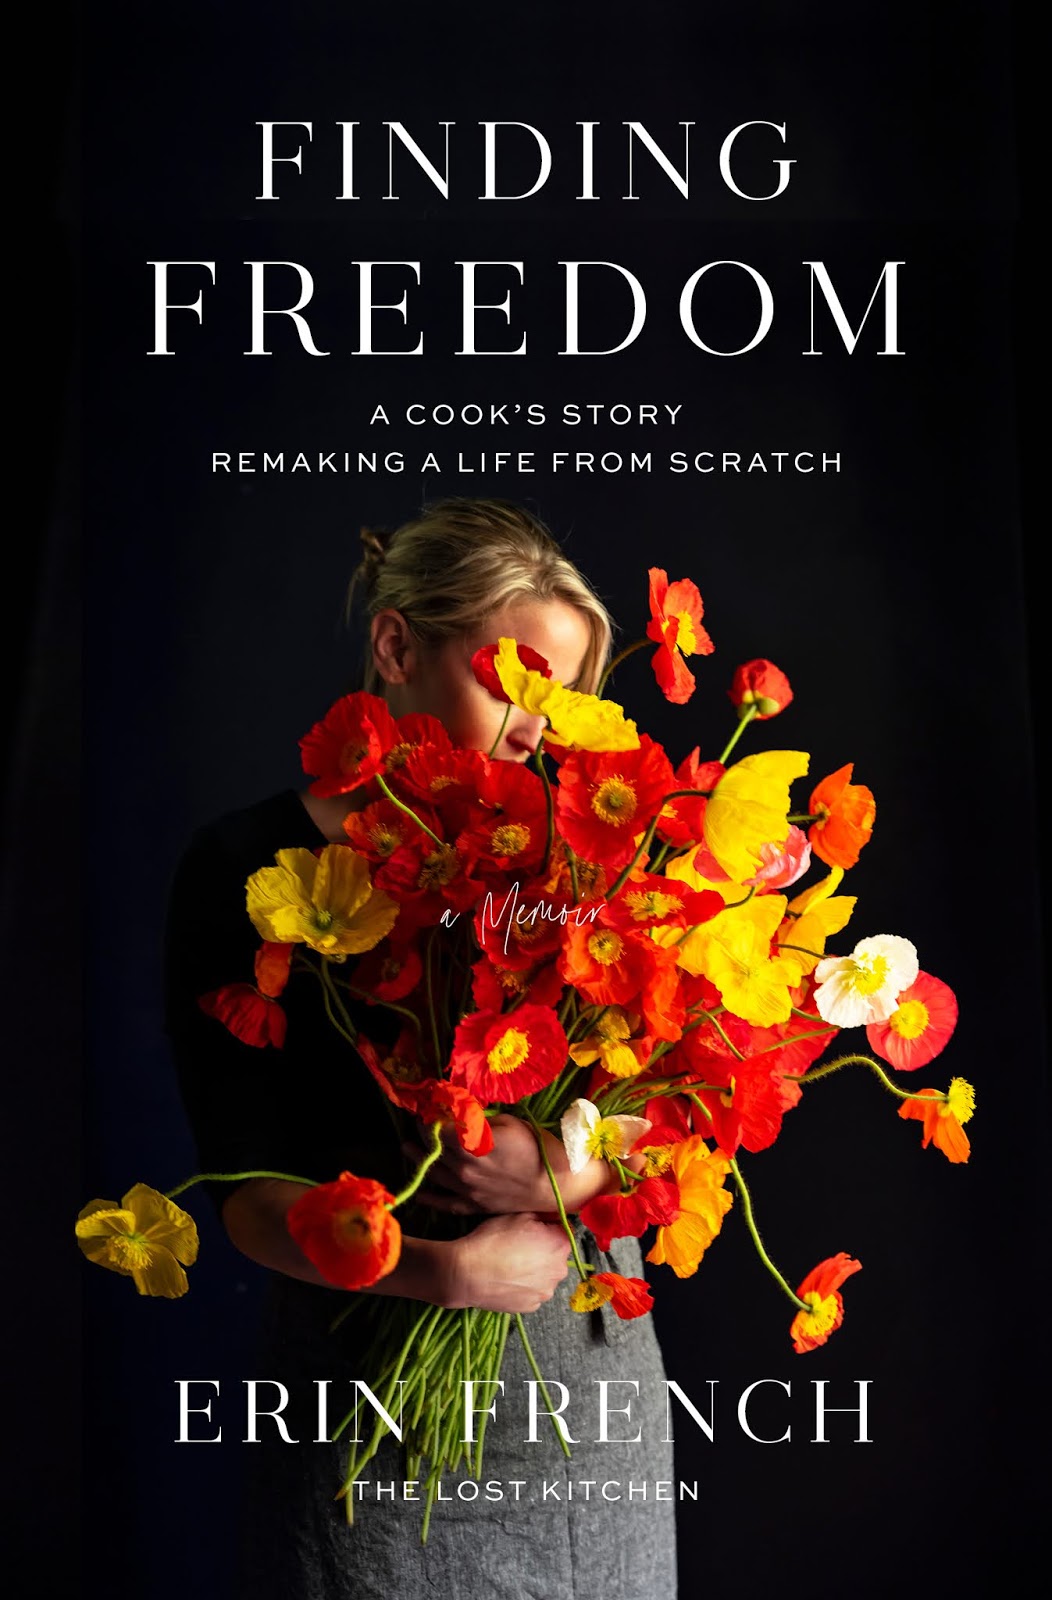 Review: Finding Freedom by Erin French